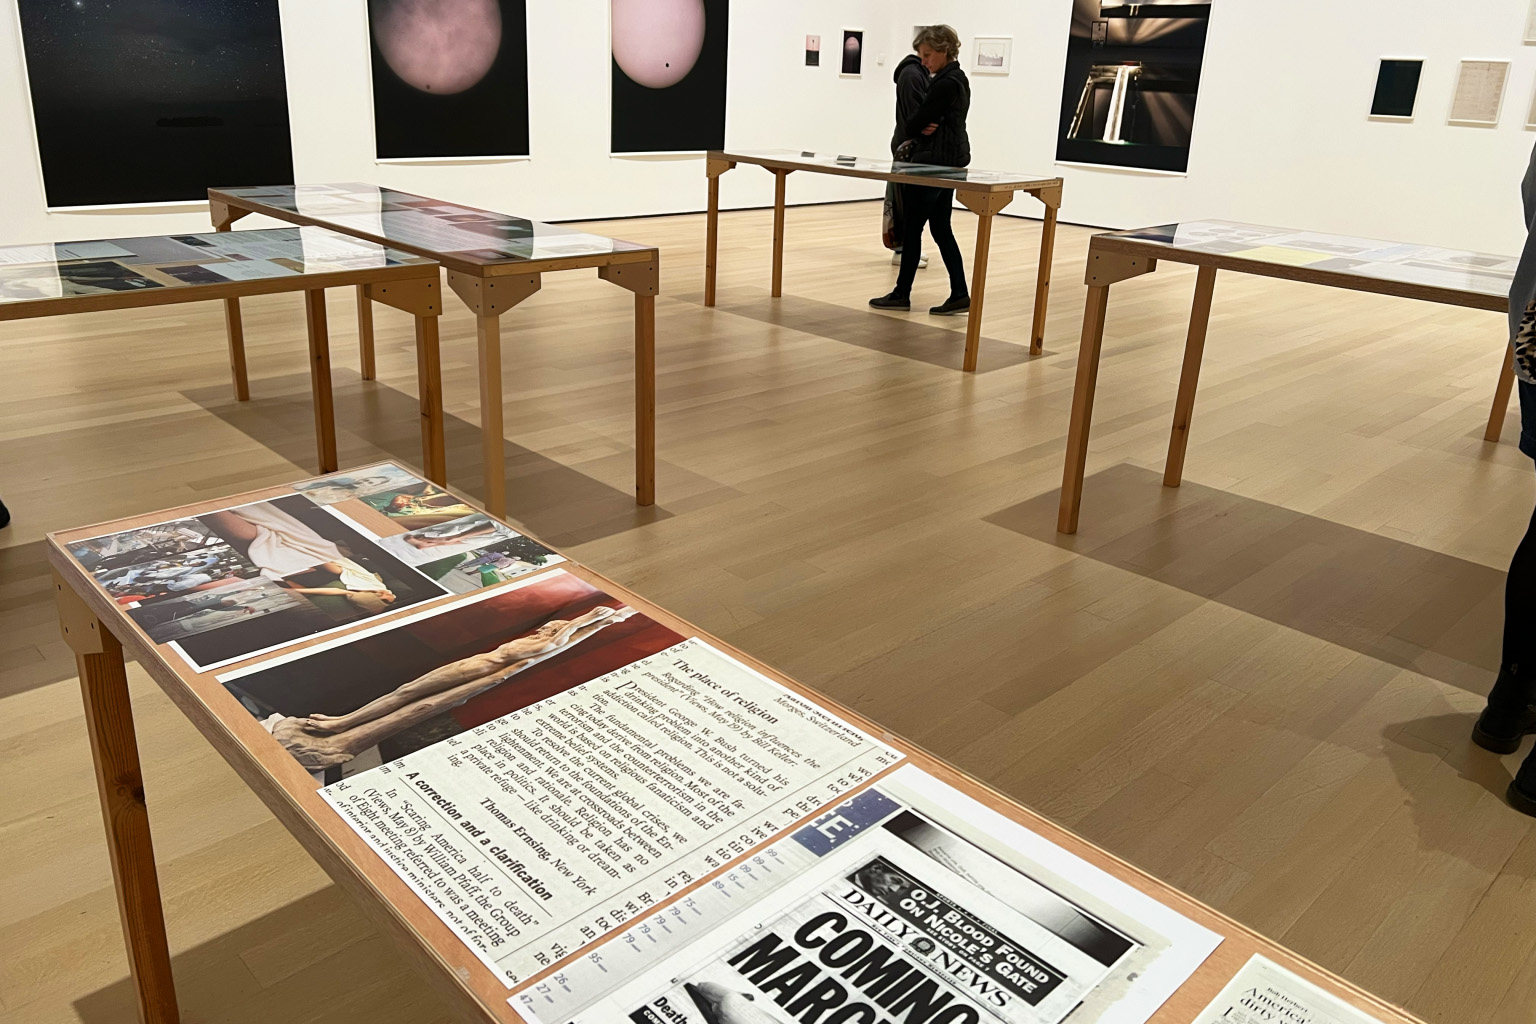 "Truth Study Center" fills most of the MOMA gallery room space located at the center of Wolfgang Tillmans's retrospective.